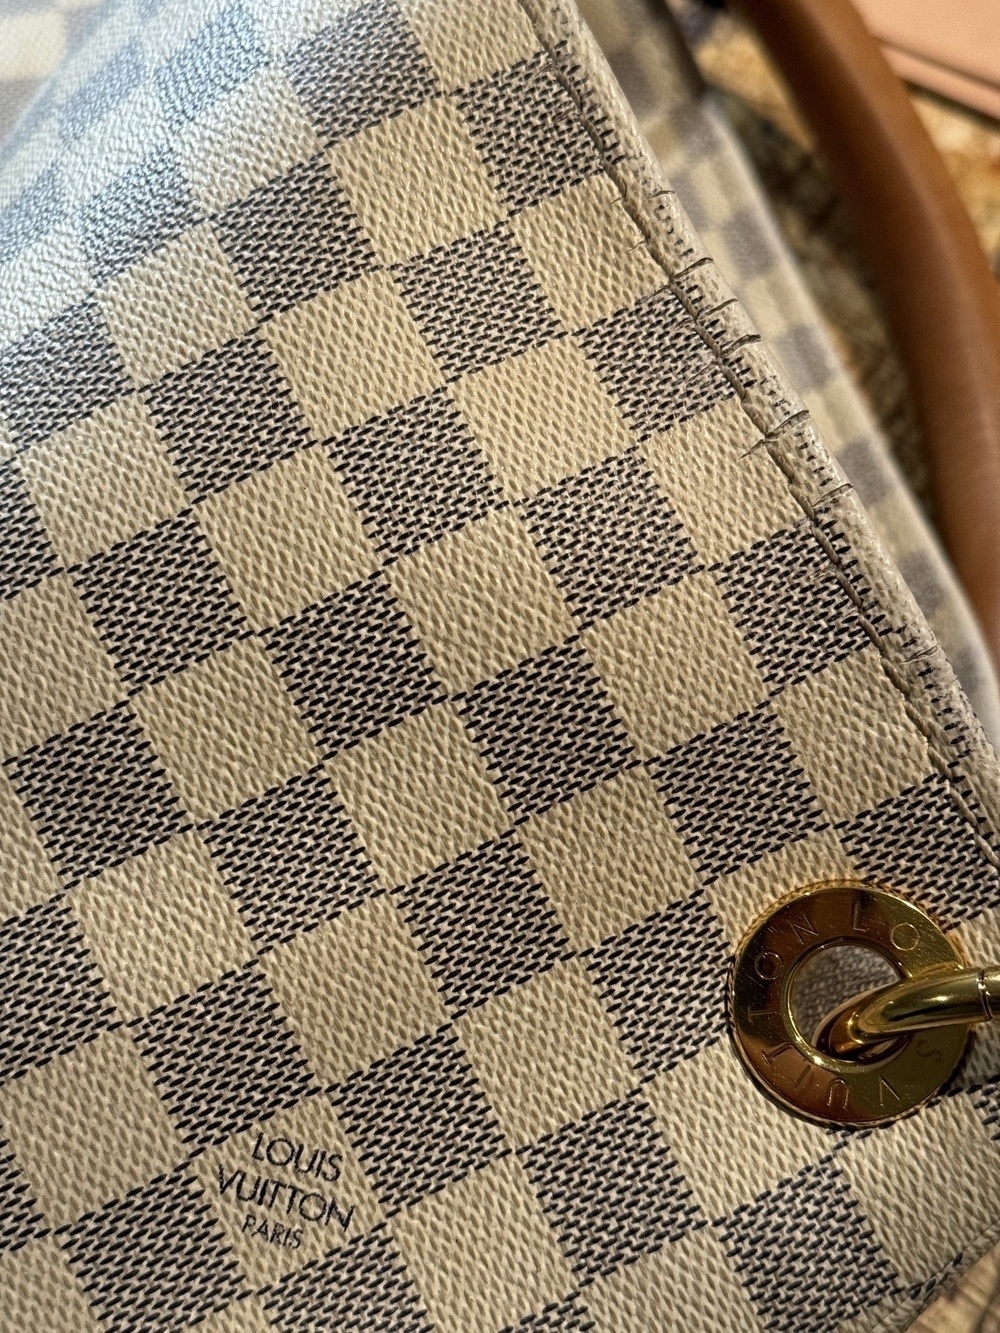 A close-up view of a cracked Louis Vuitton checkered fabric accessory with a circular metal ring is shown.